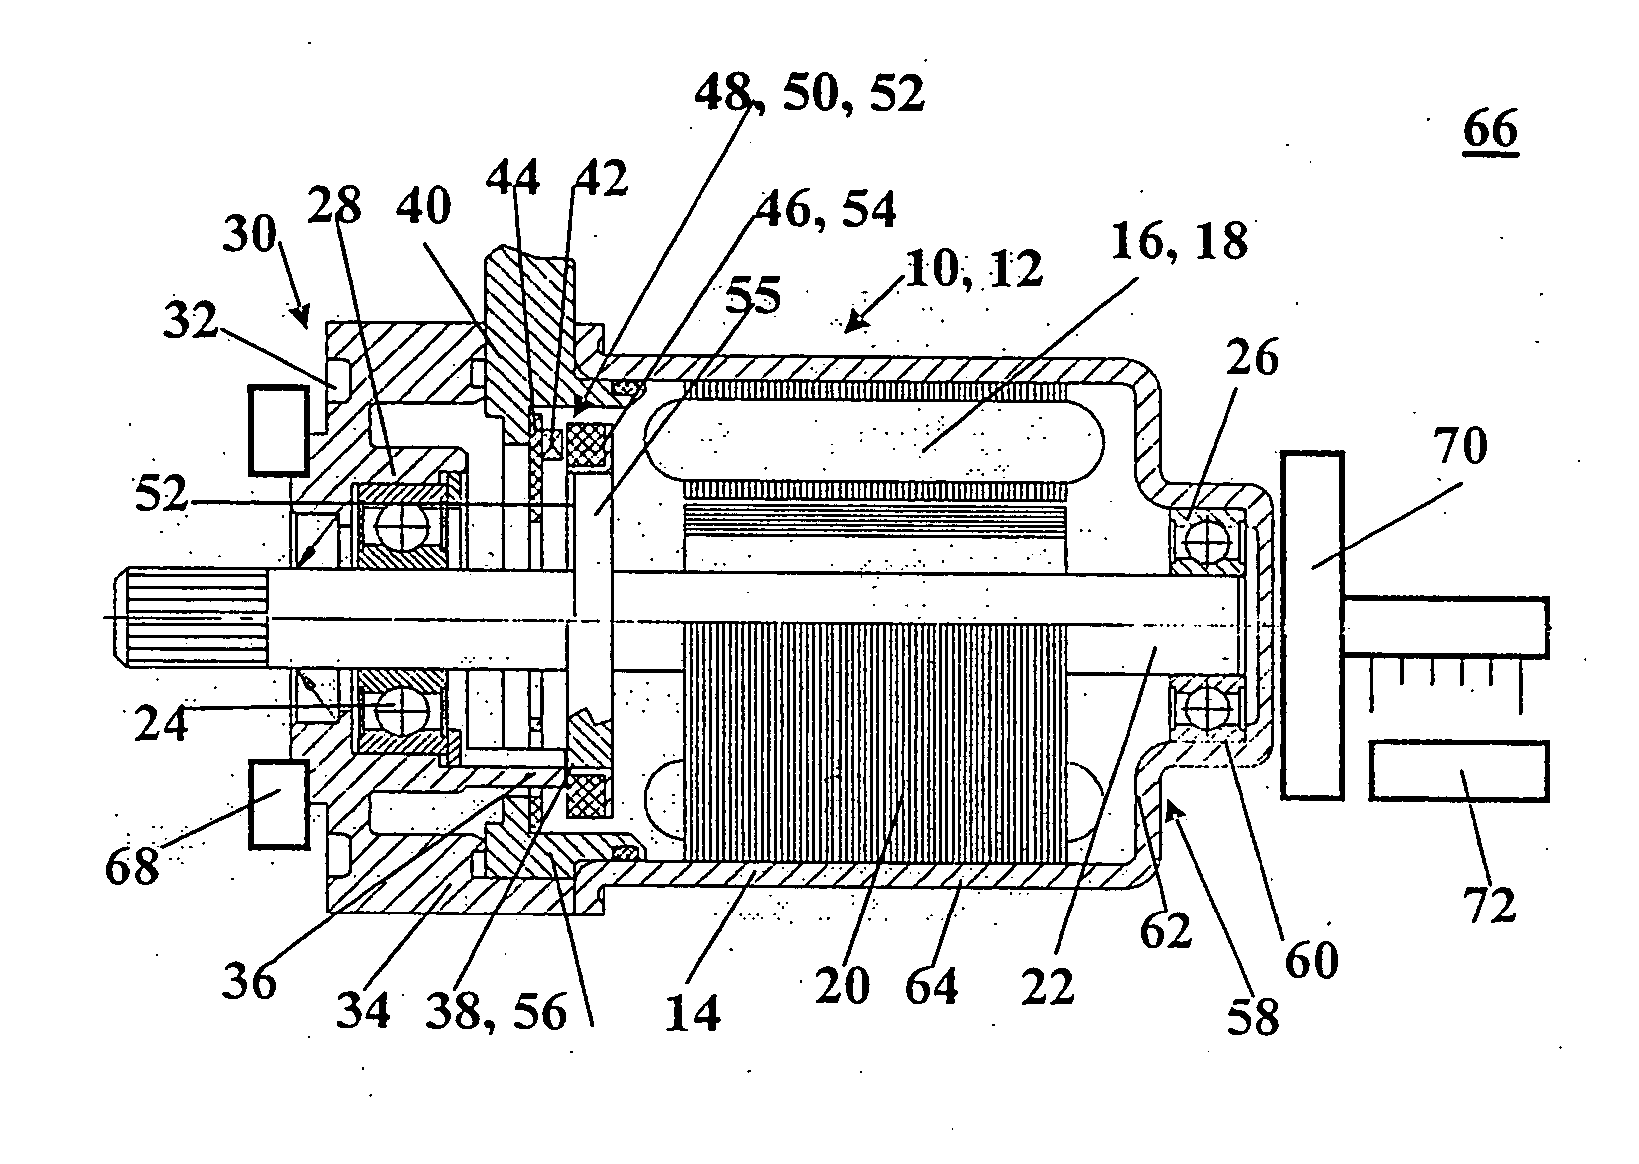 Electrical Machine and Method for Adjusting an Axial Spacing of the Electrical Machine